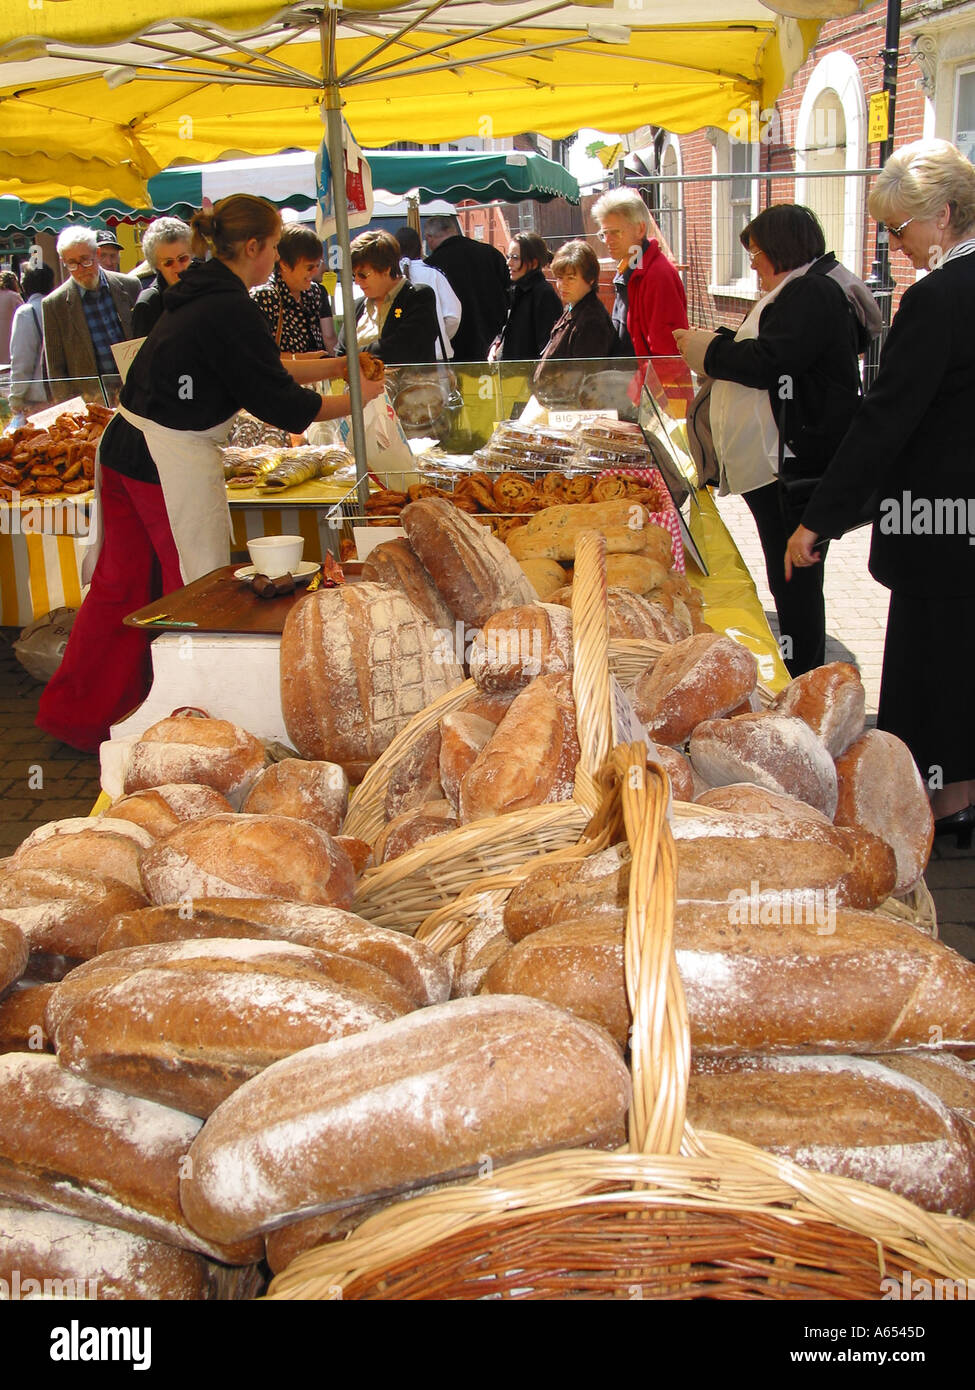 French Bakery, buying French bread, French boulangerie stall, French market, France Stock Photo